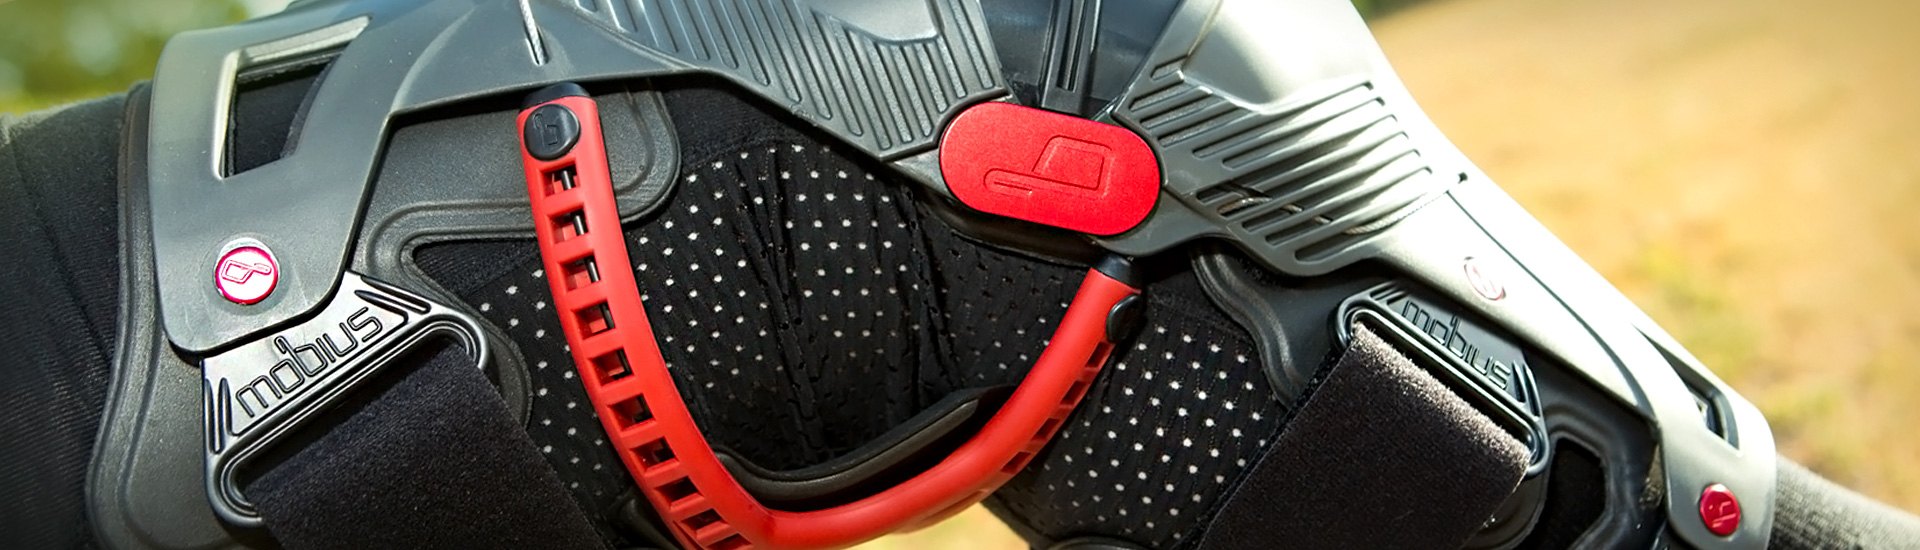 Are Knee and Ankle Protection Necessary During Powersports Activities?